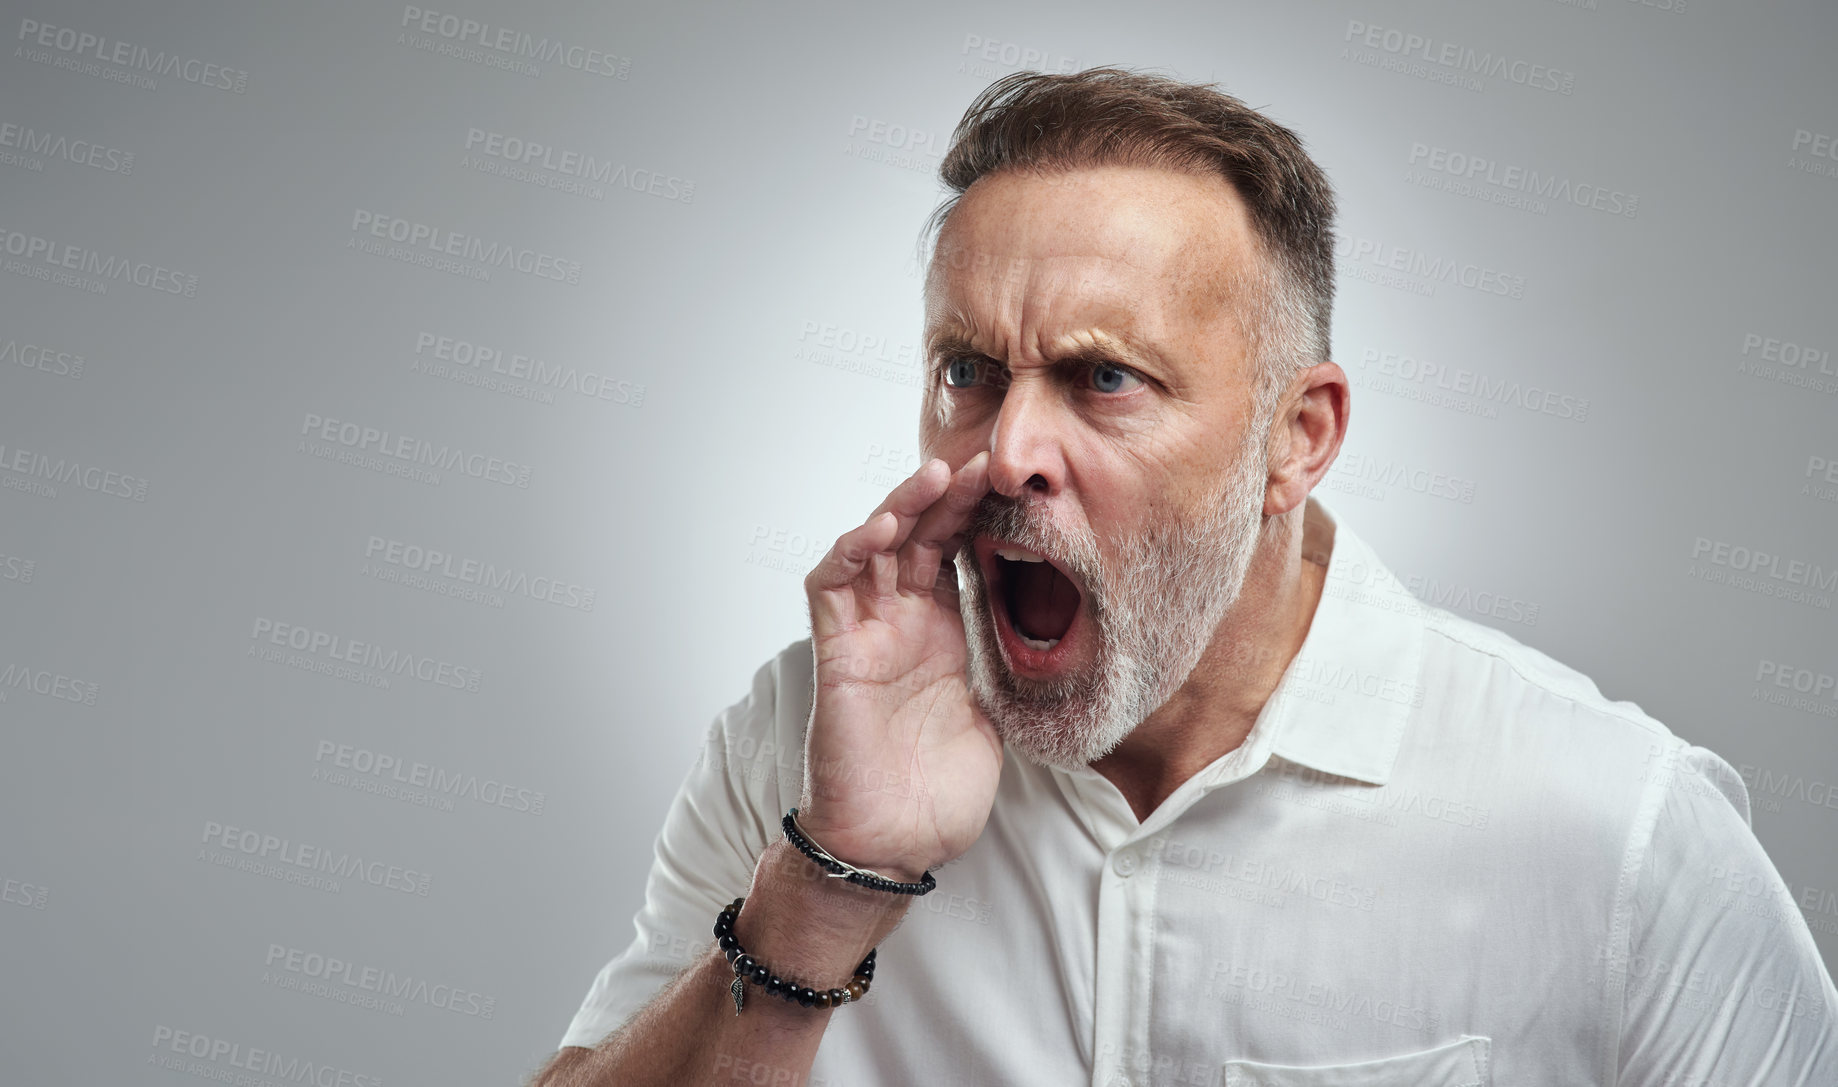 Buy stock photo Studio shot of a mature man yelling against a grey background